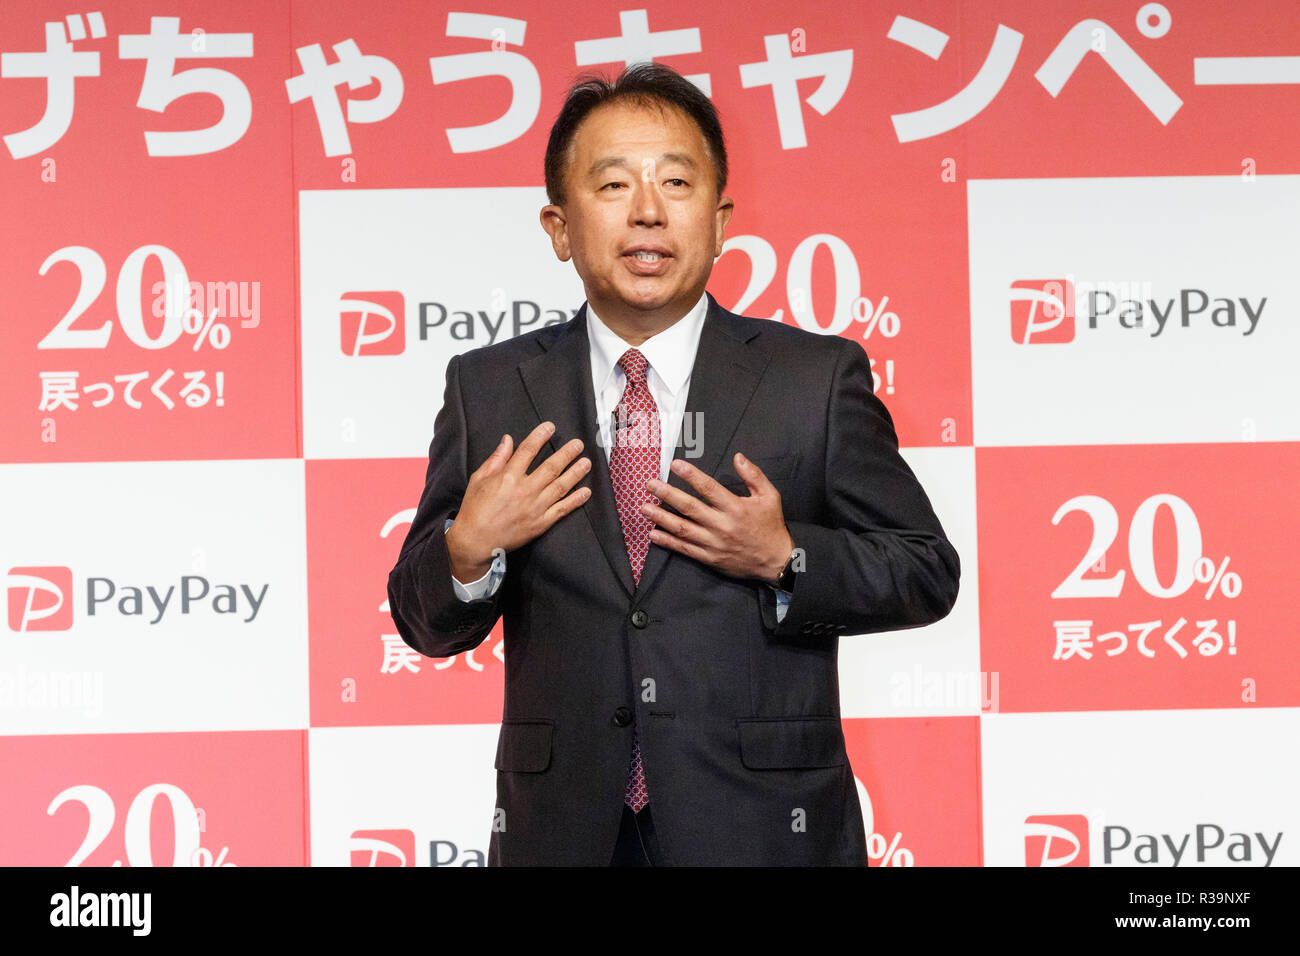 Jun Shimba representative director and COO of SoftBank Corp. speaks during a news conference to announce the new smartphone payment service ''PayPay'' on November 22, 2018, Tokyo, Japan. PayPay is a smartphone payment service using barcodes (QR codes) supported by SoftBank, Yahoo Japan and Paytm, that can be used in Japanese stores including Bic Camera, Yamada Denki and Family Mart. Credit: Rodrigo Reyes Marin/AFLO/Alamy Live News Stock Photo